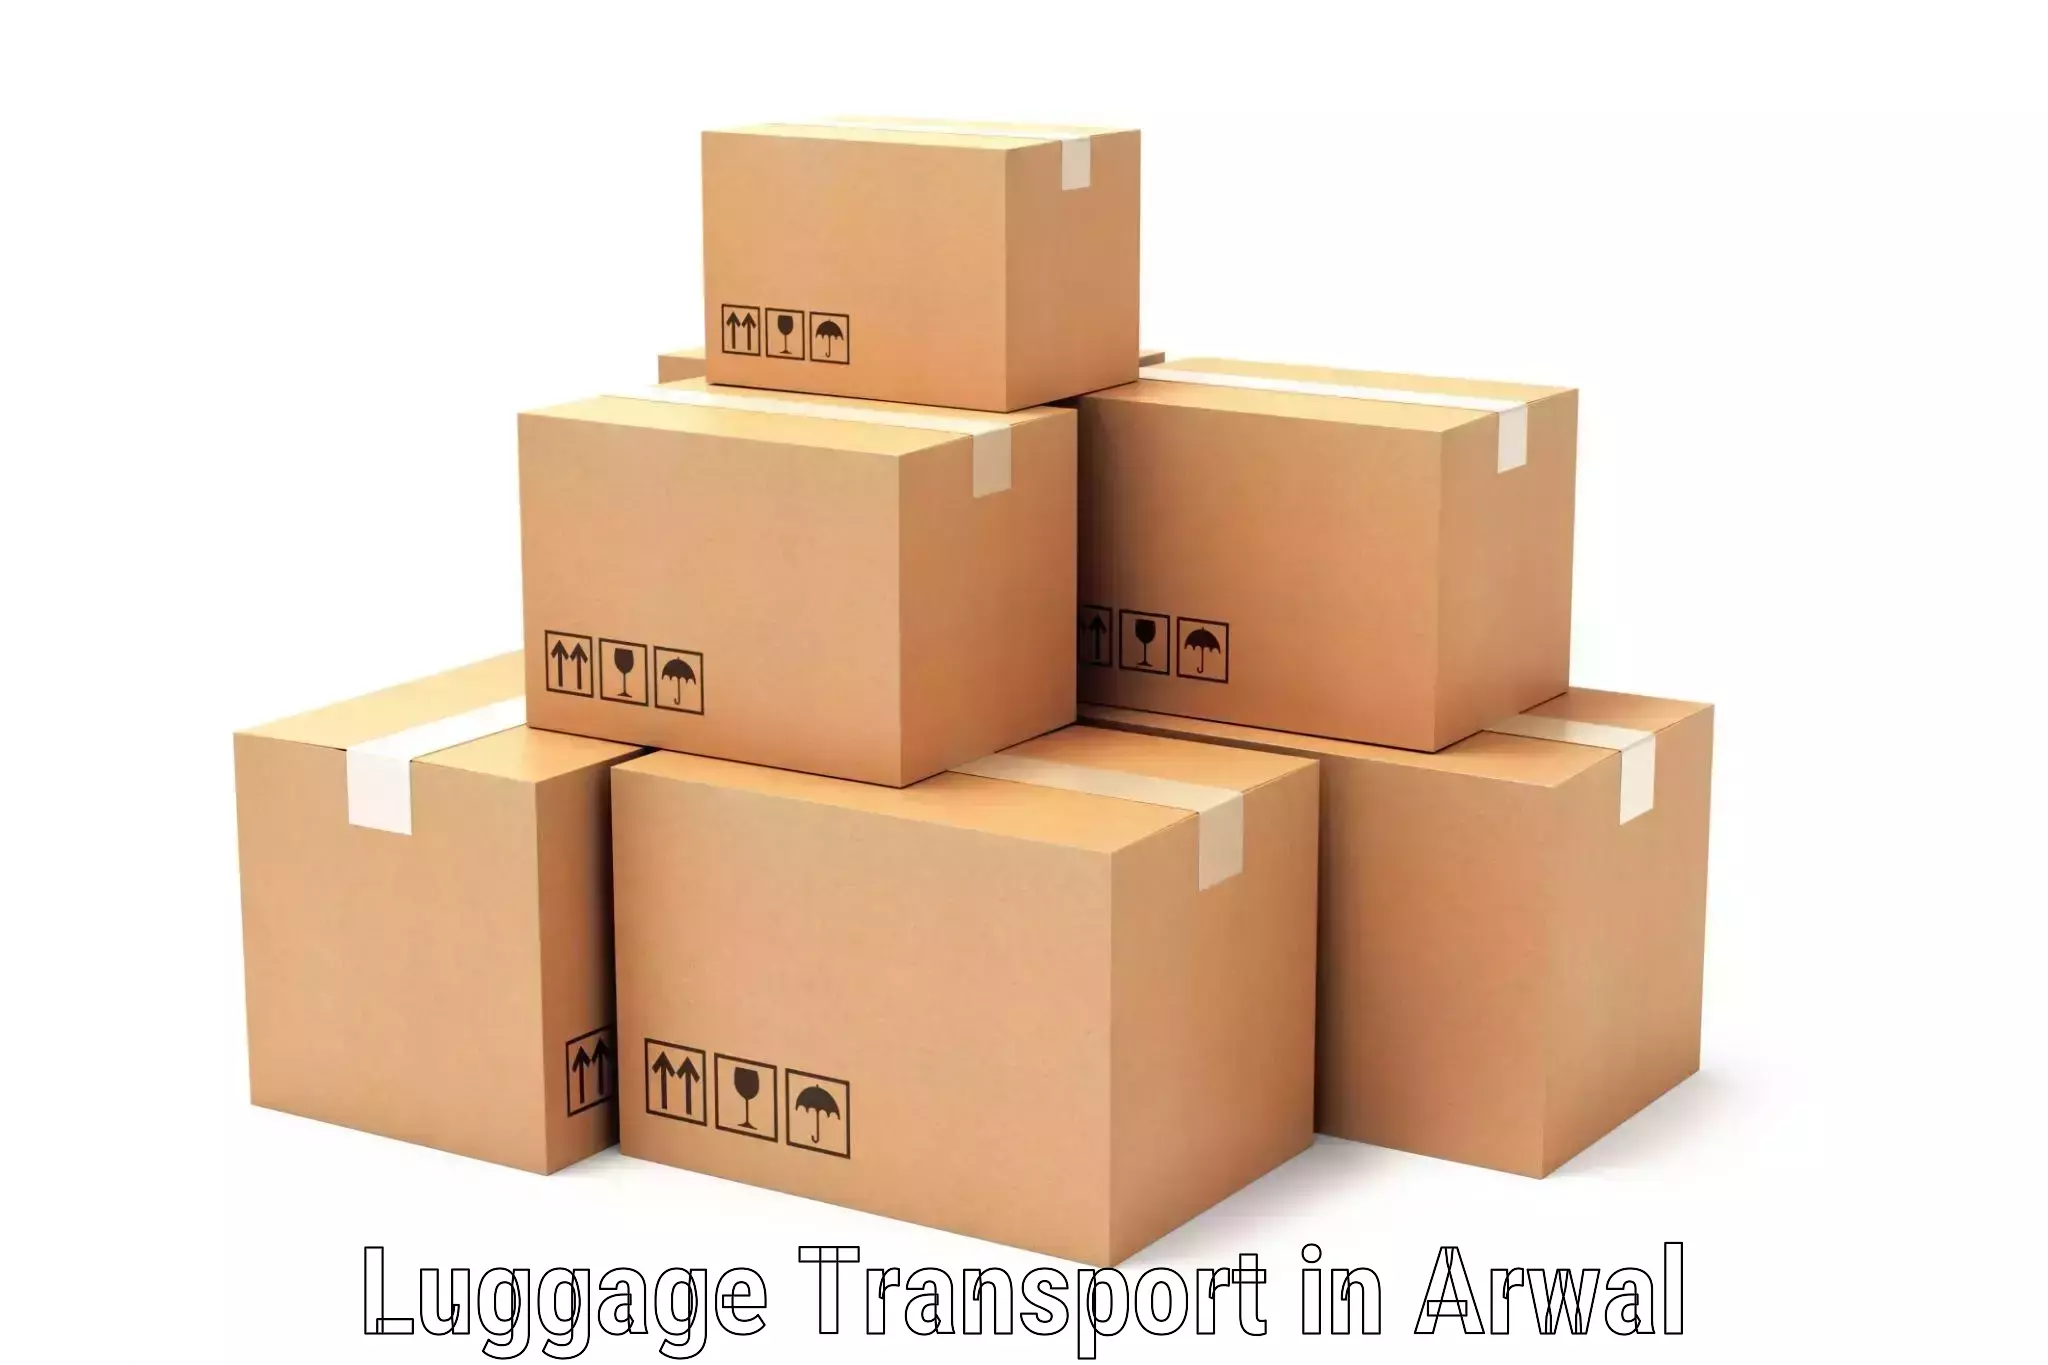 Luggage transport solutions in Arwal